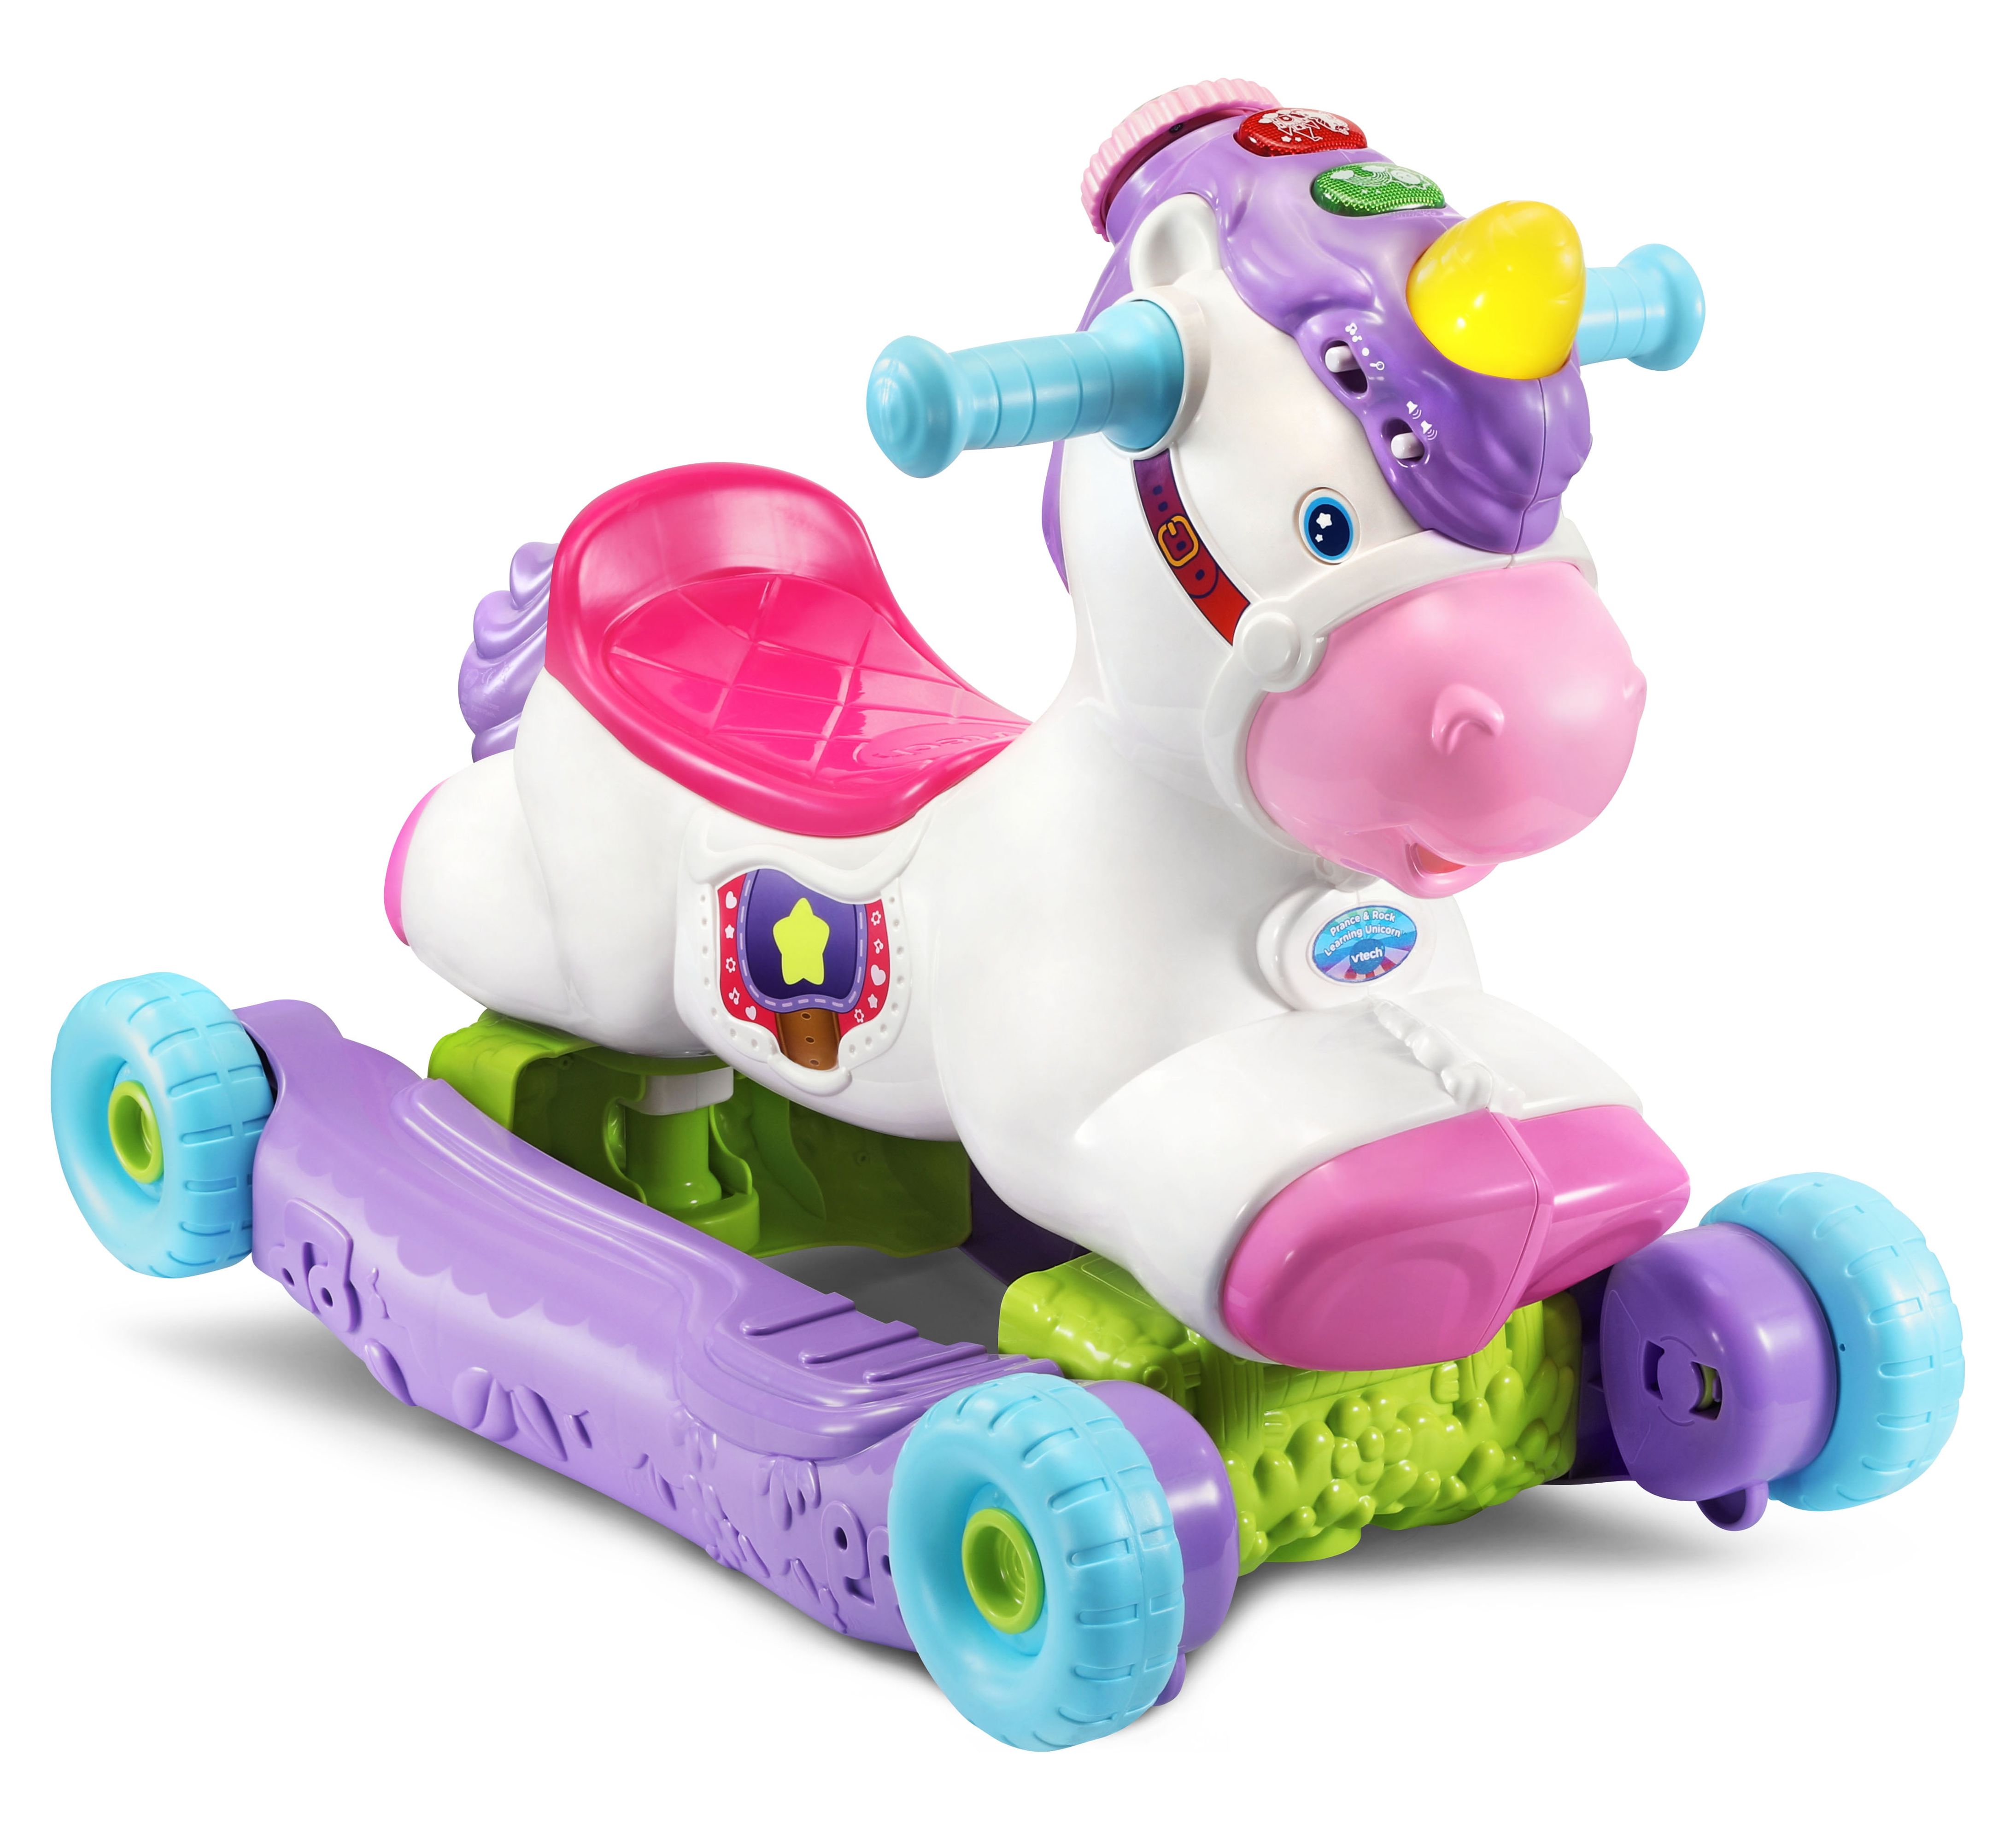 VTech Prance and Rock Learning Unicorn, Rocker to Rider Toy, Motion-Activated Responses - image 9 of 14